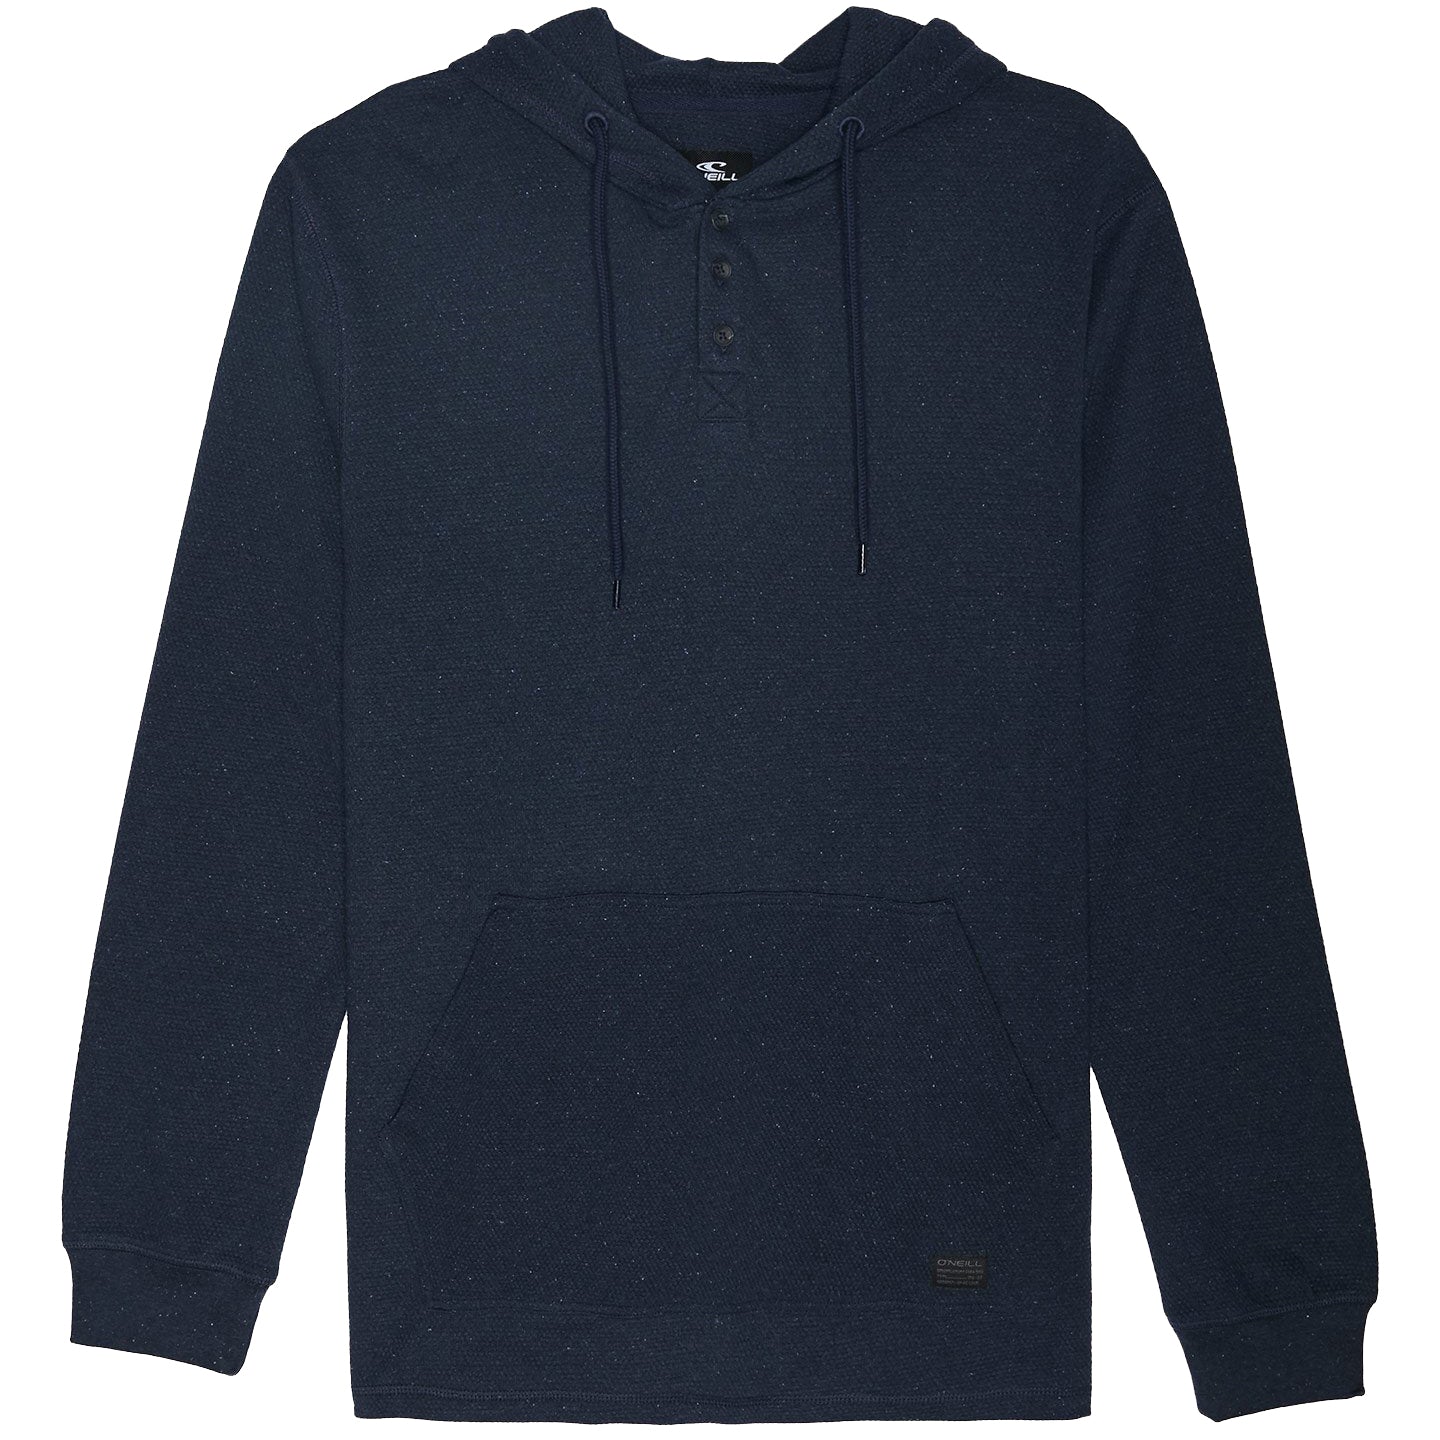 O'neill Apollo Pullover Hoodie NVY-Navy S